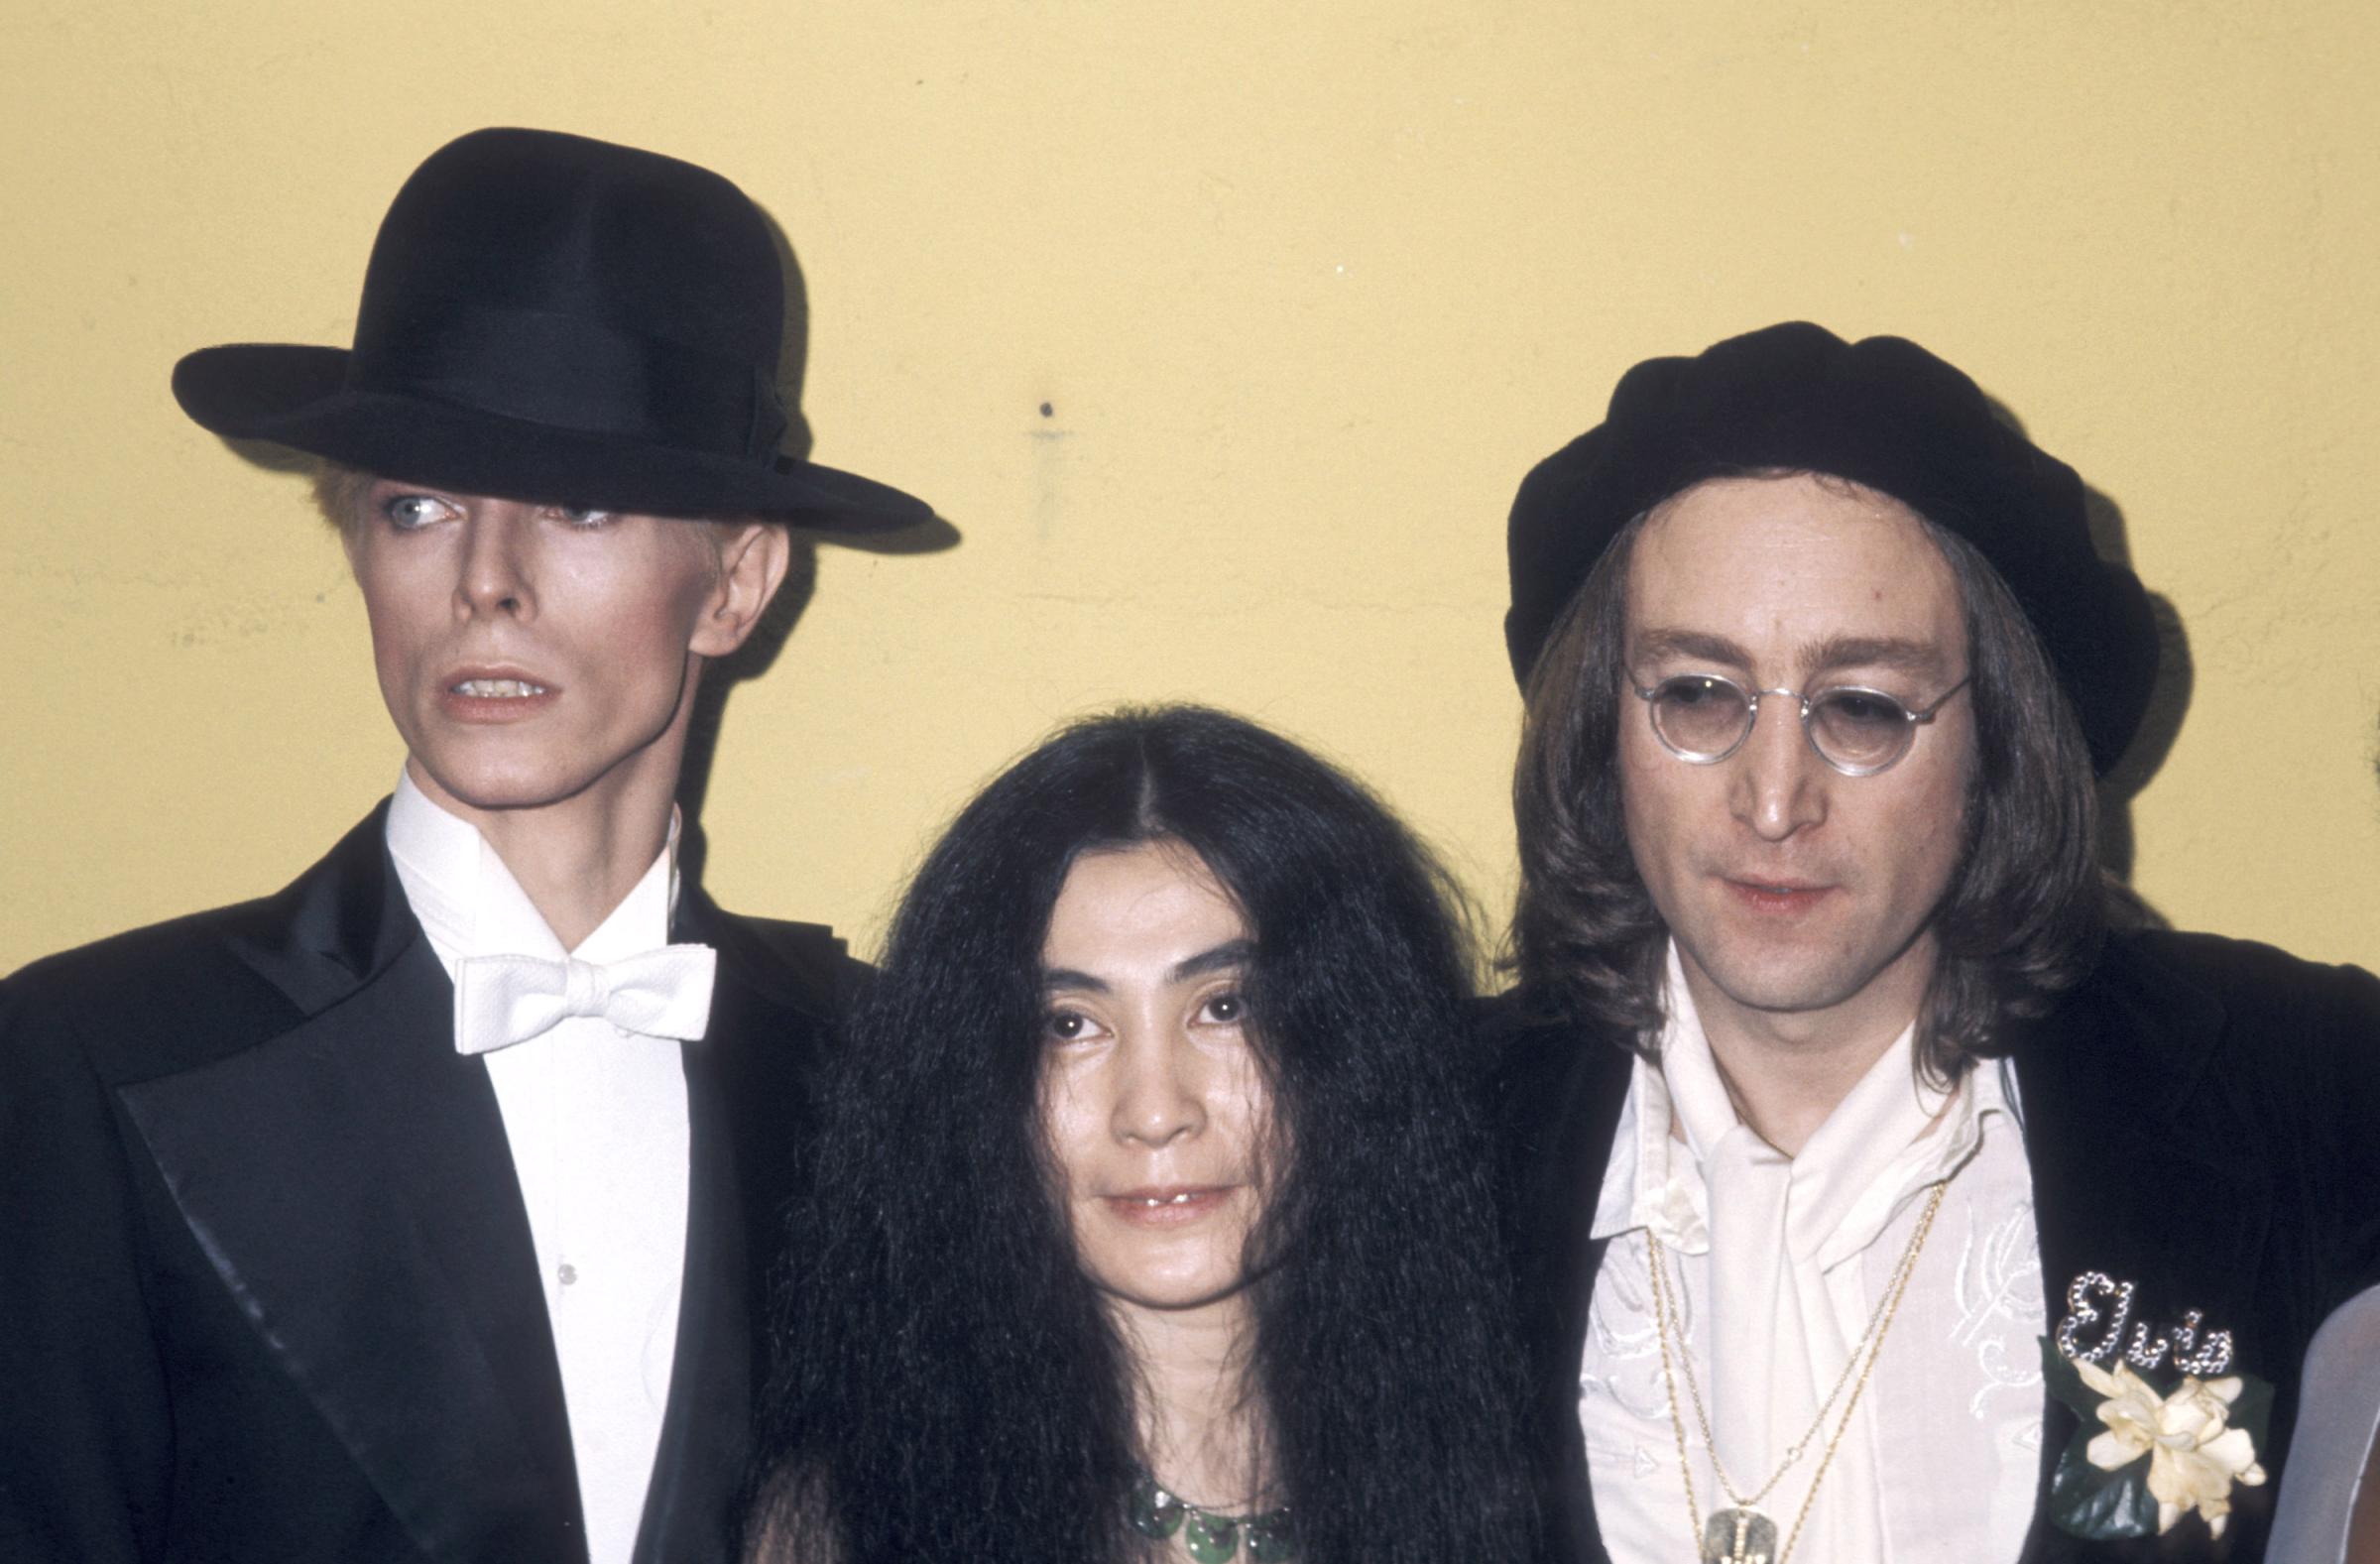 From left: David Bowie, Yoko Ono and John Lennon at the 17th Annual Grammy Awards on Feb. 28, 1975 in New York City.